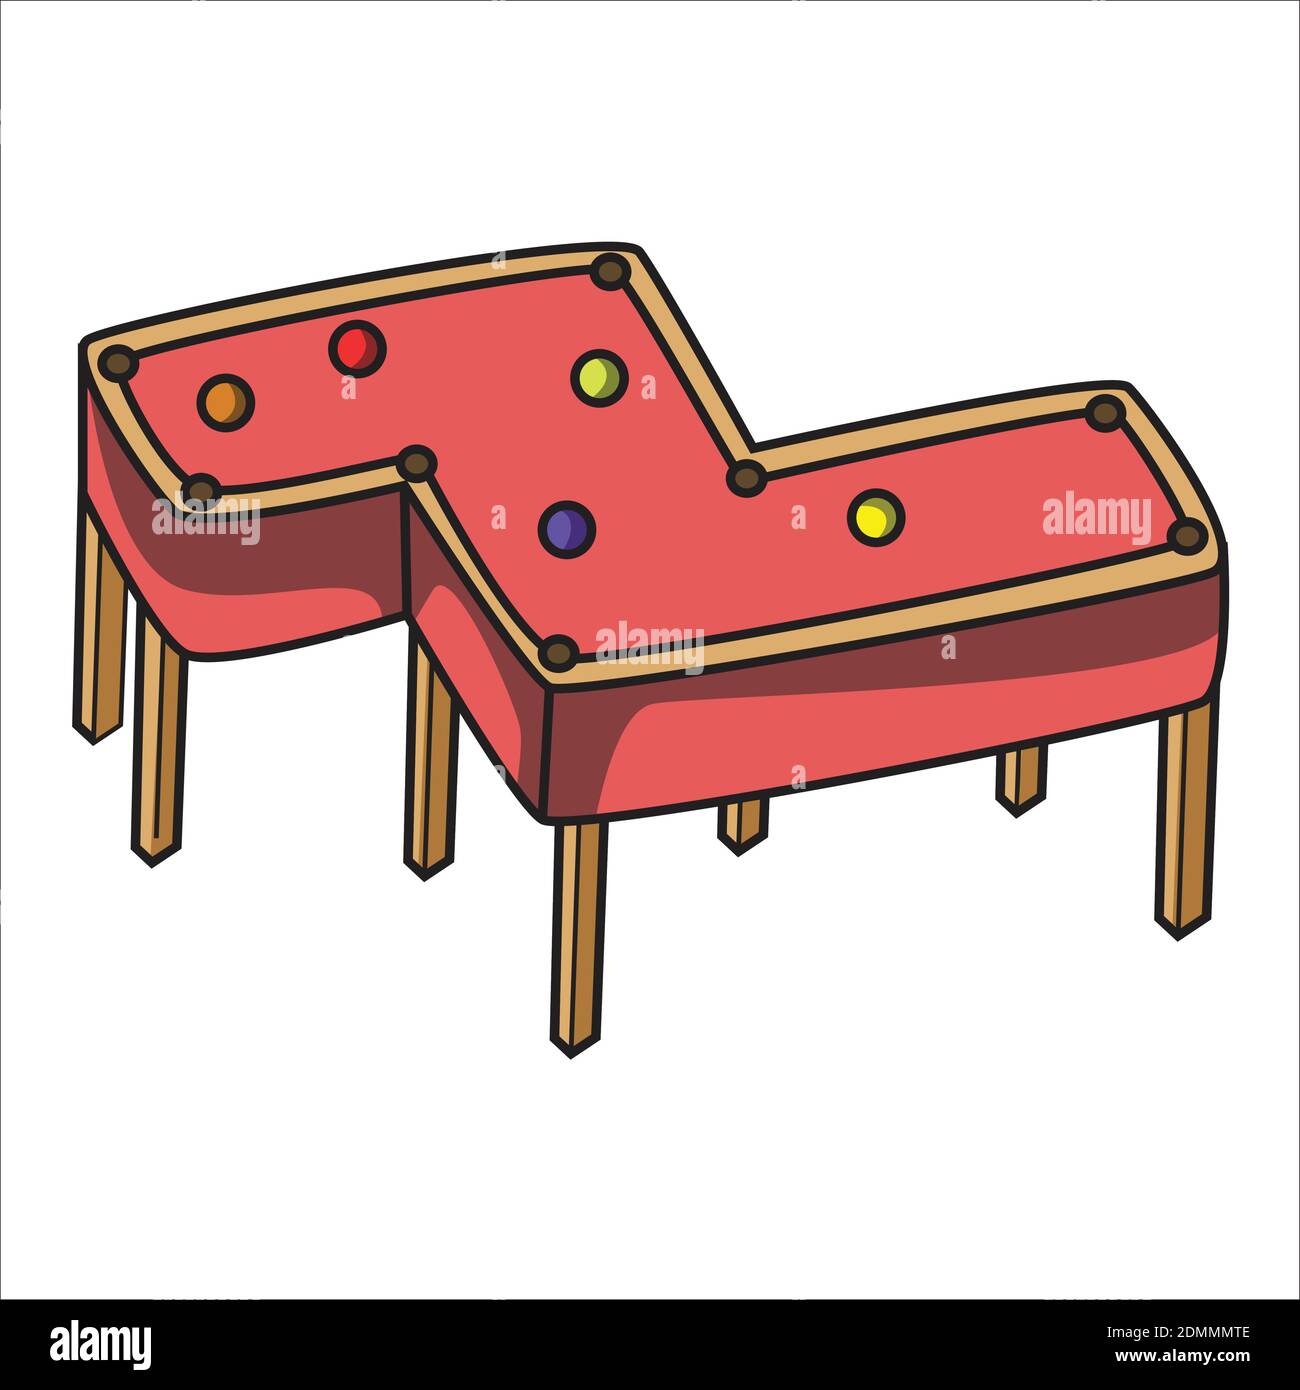 Zigzag pool table. Illustration, Vector Pool Table variation. Stock Vector